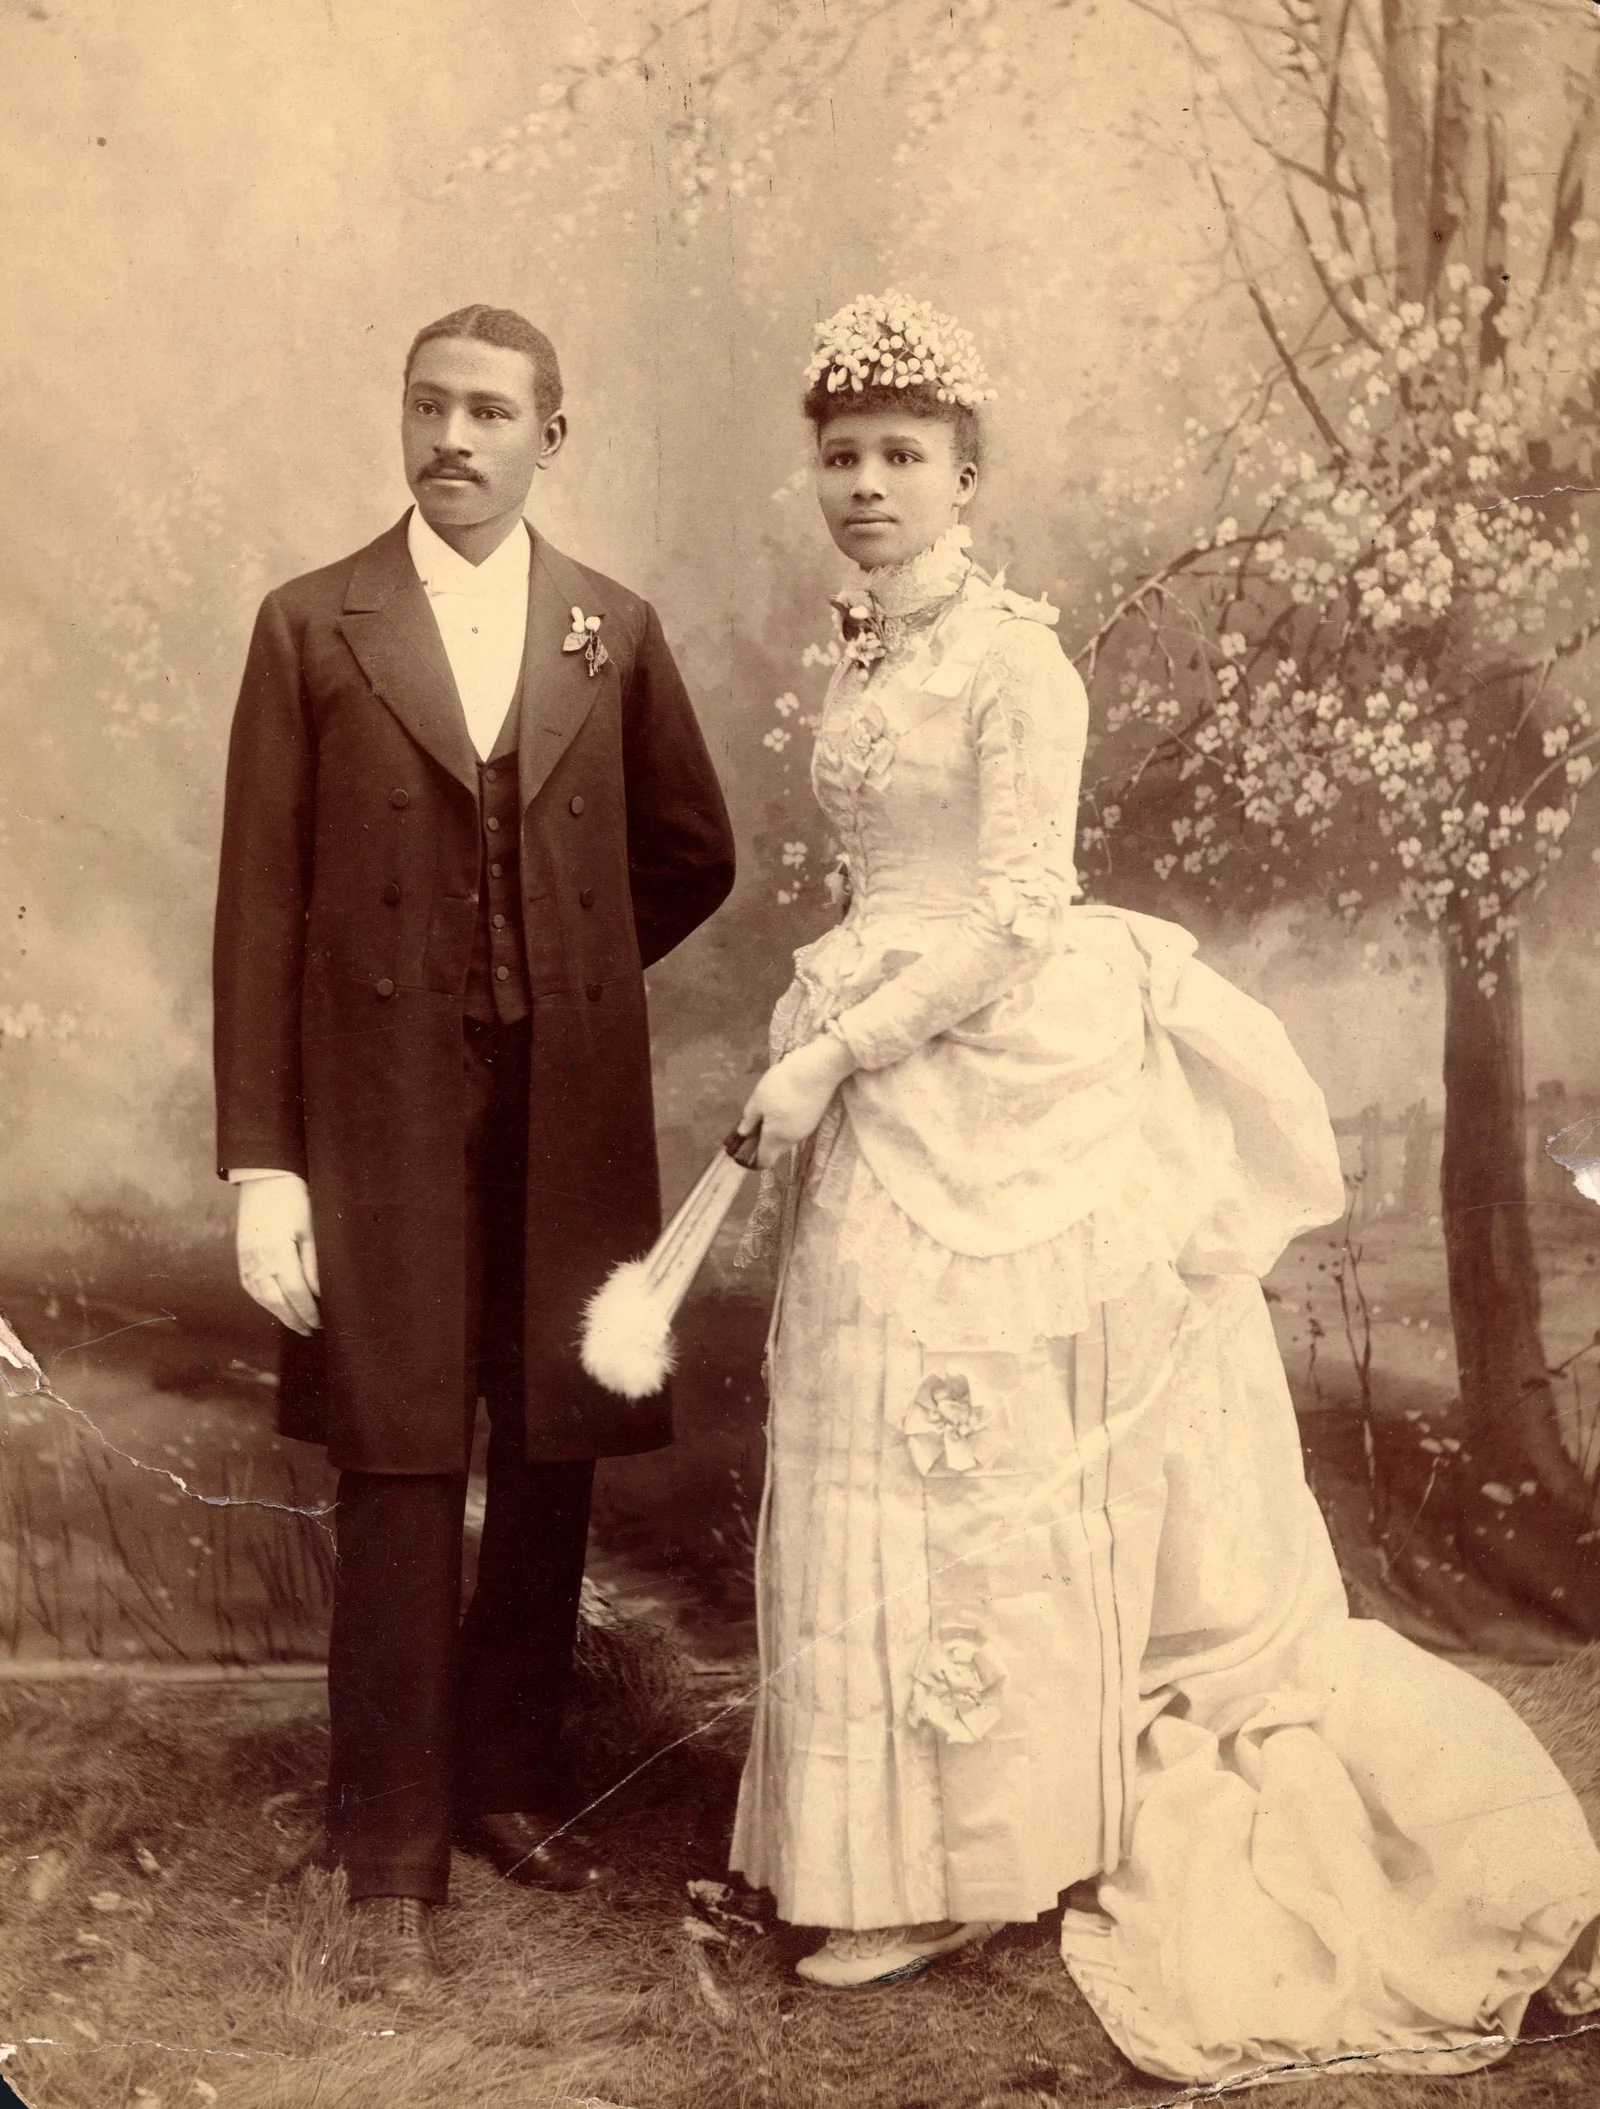 Sepia-tone portrait of an elaborately dressed couple, one in a three-piece suit and the other in a white dress with a bustle, holding a fan.